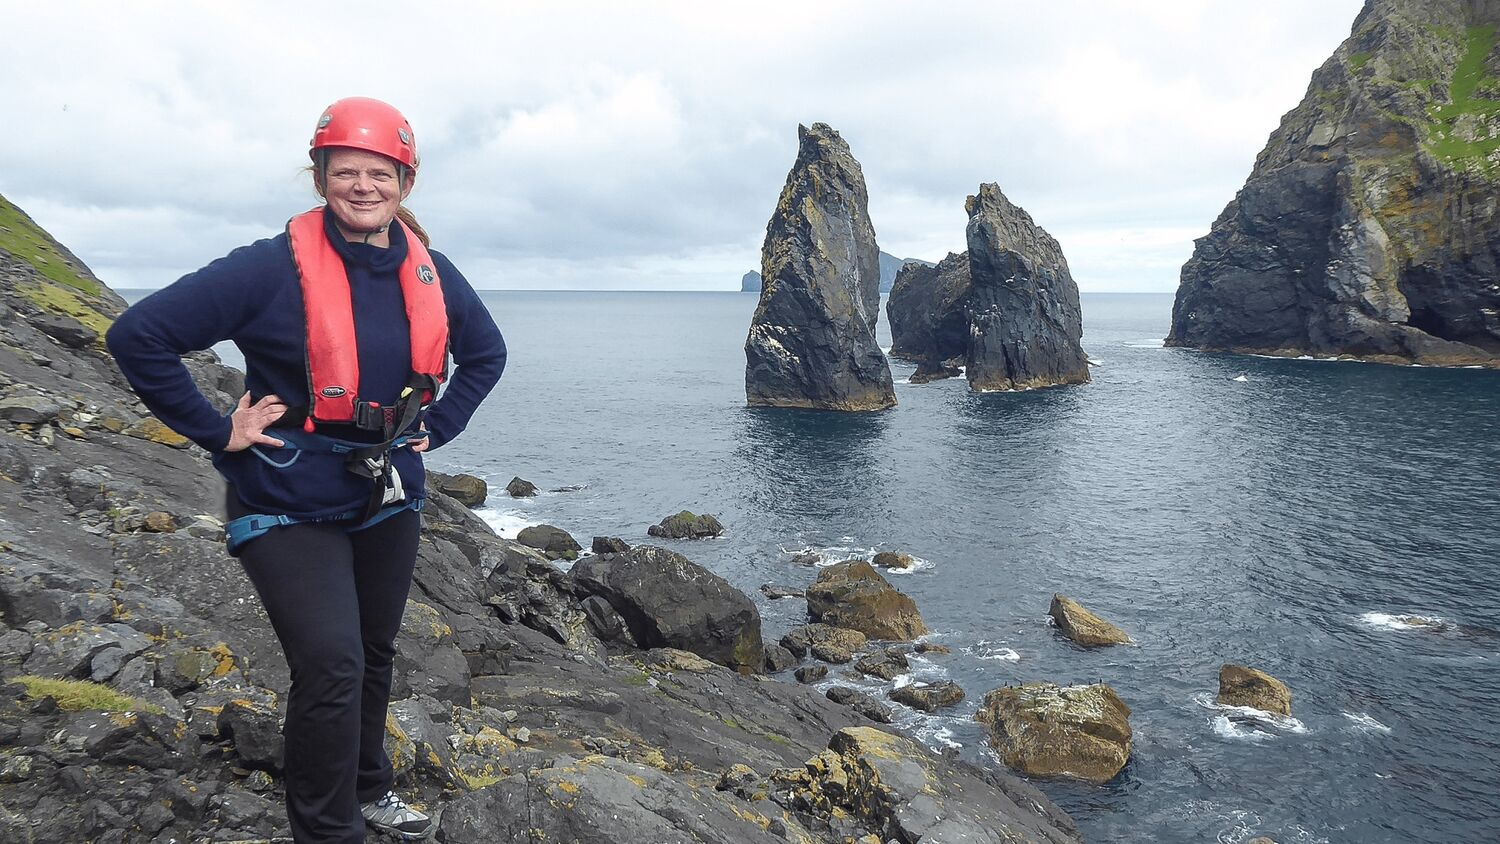 A woman wearing a red helmet and red floatation jacket stands on a rocky ledge beside a sea inlet. Large rock stacks stand just off shore behind her.